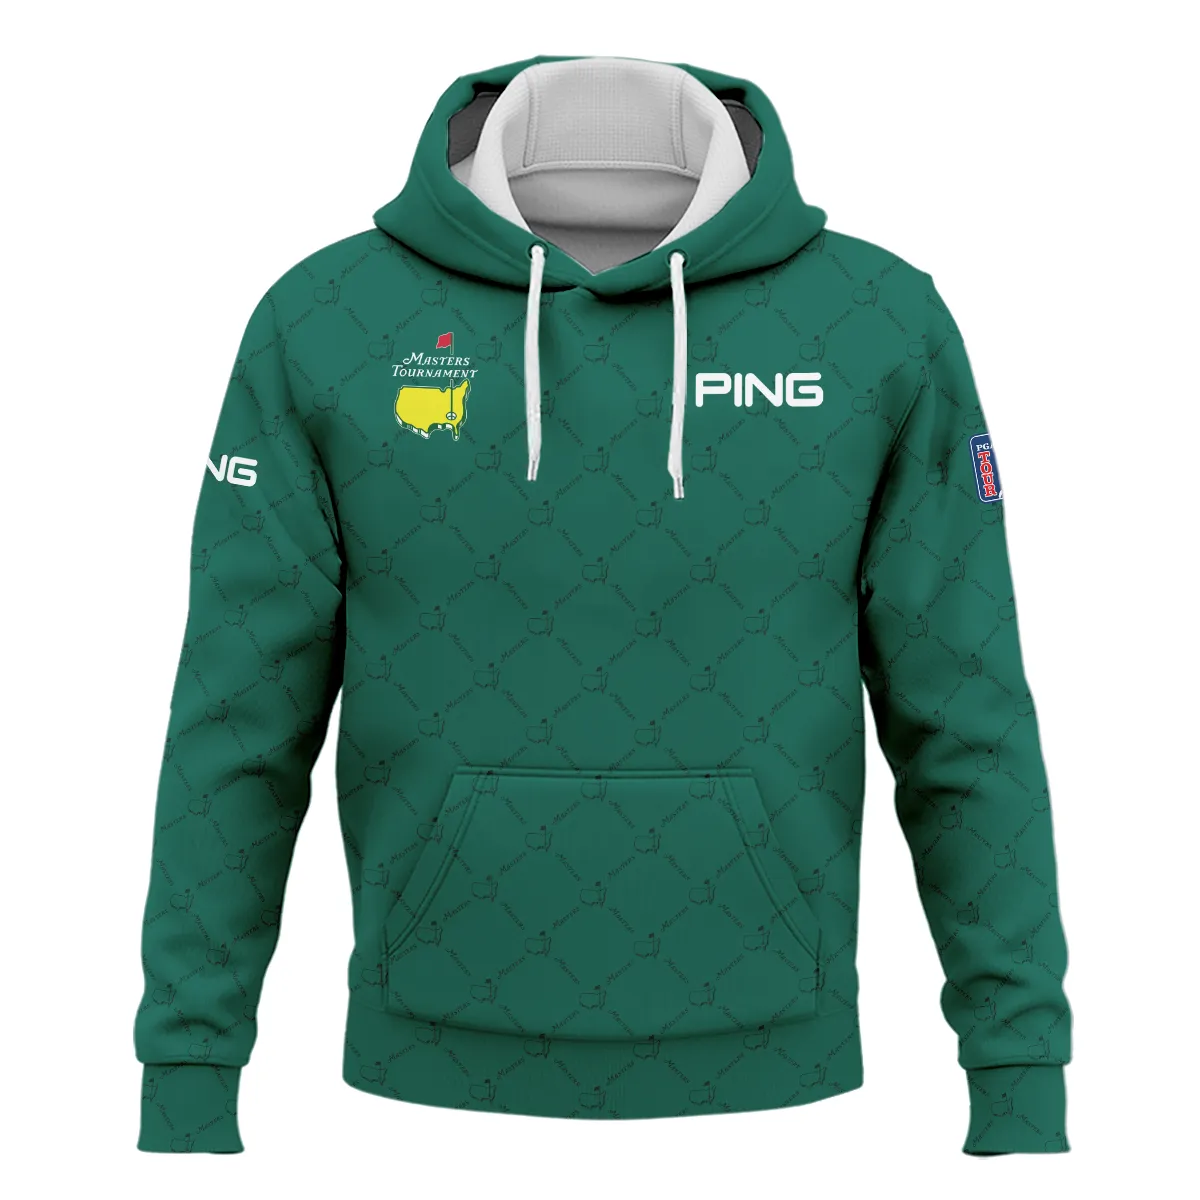 Golf Sport Pattern Color Green Mix Black Masters Tournament Ping Quarter-Zip Jacket Style Classic